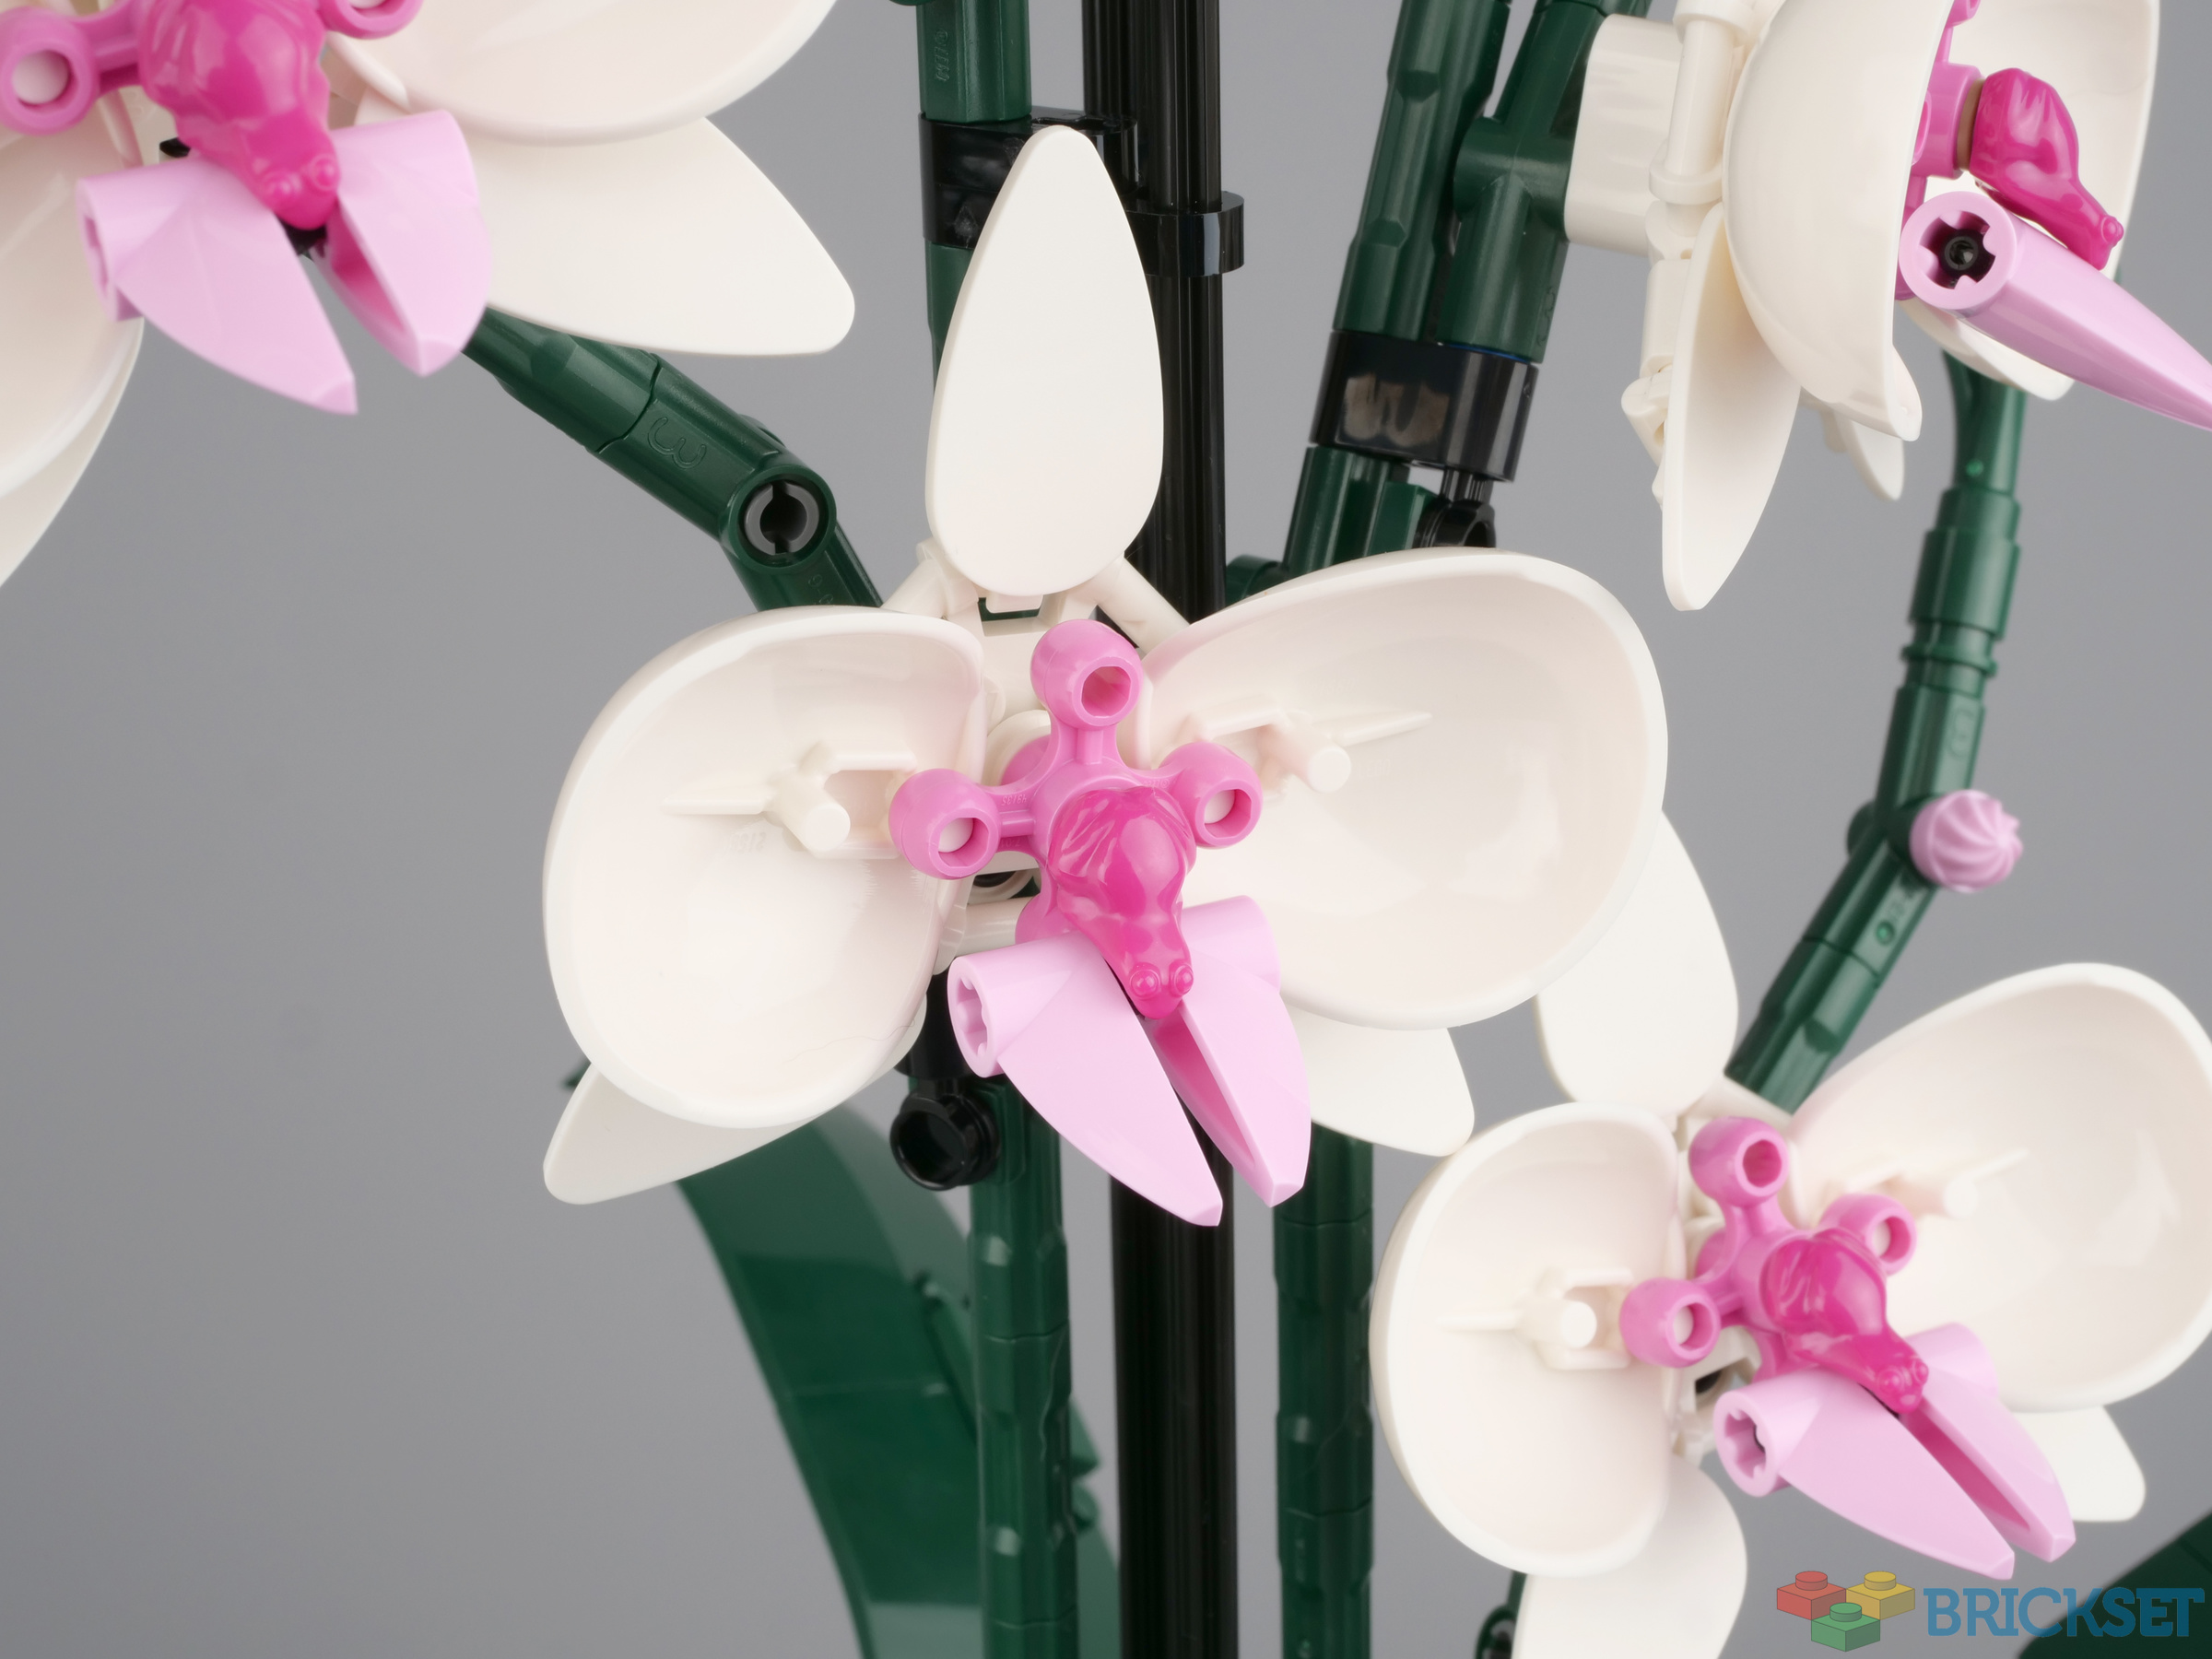 Review: LEGO 10311 Orchid (2022 Botanical Collection) - Jay's